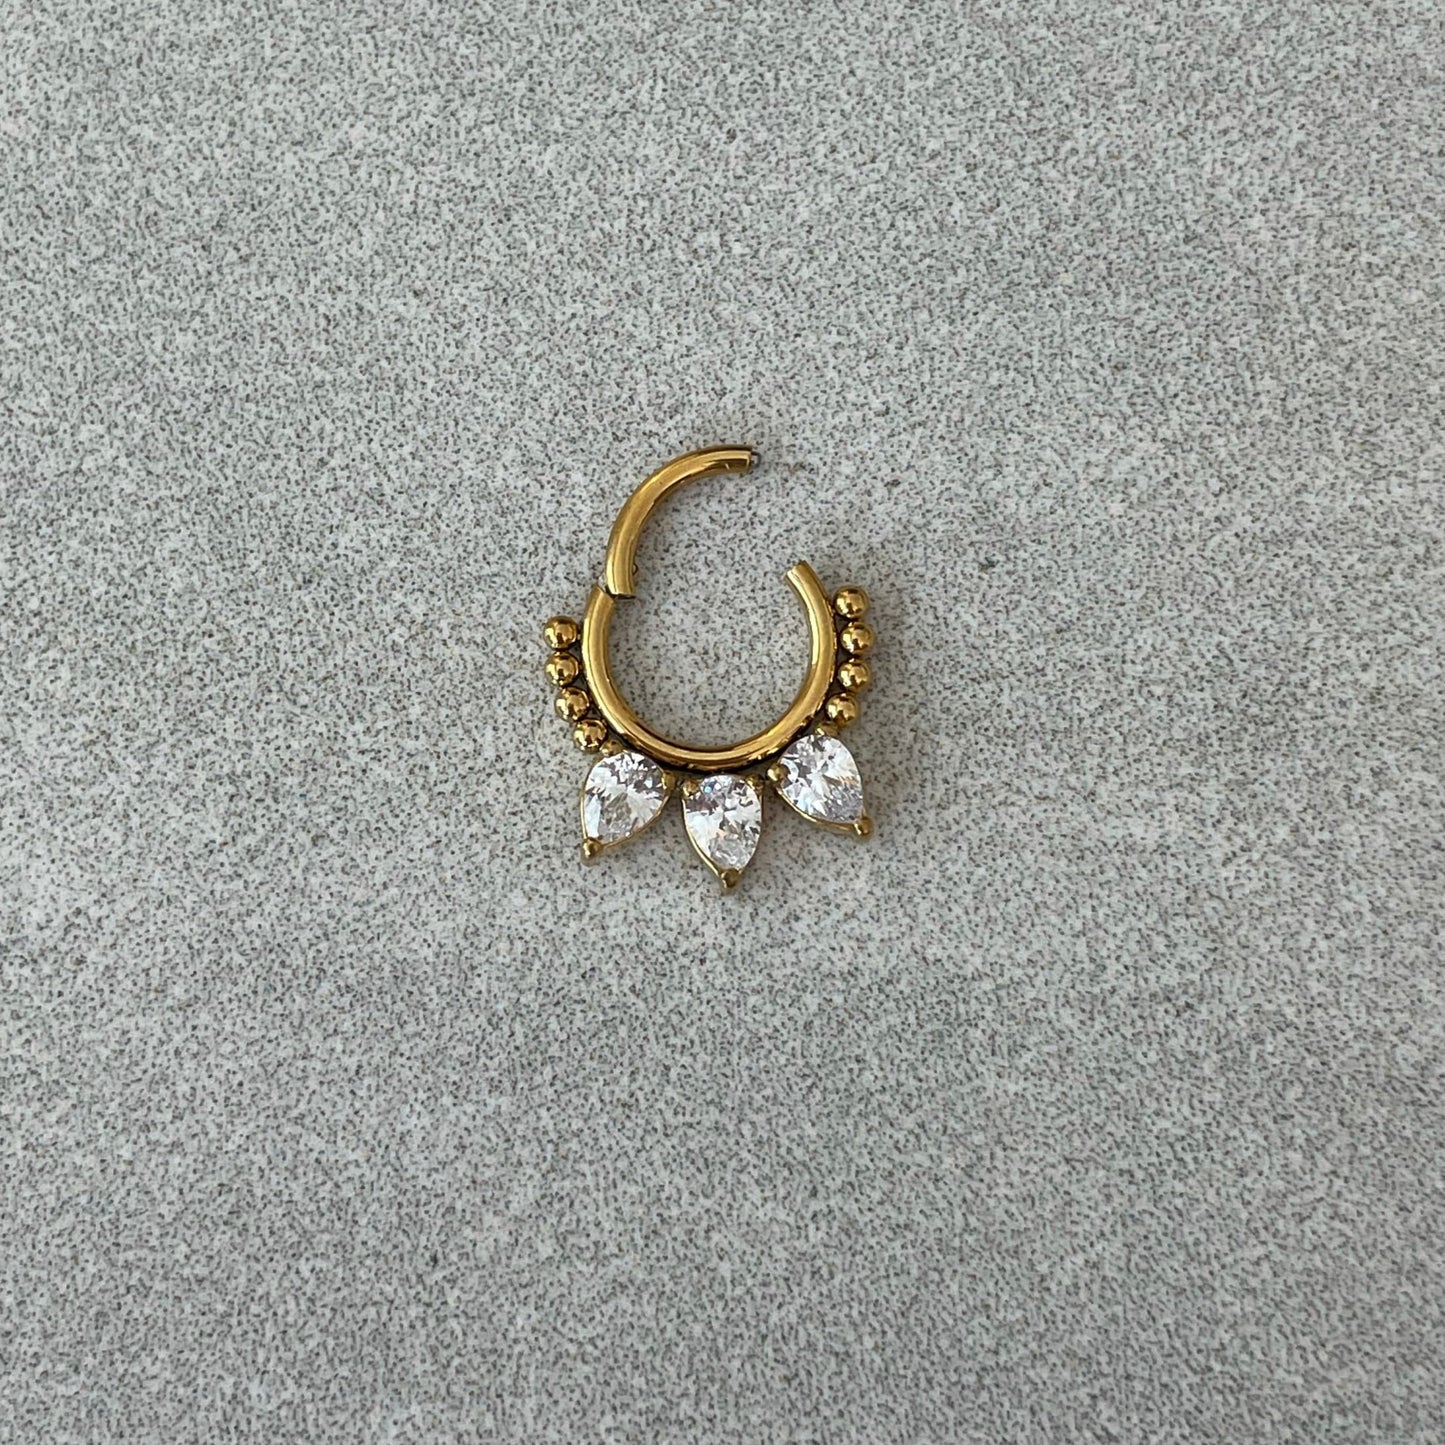 Unique Gold Daith Earring (16G | 8mm | Surgical Steel | Gold, Rose Gold, Black or Silver)